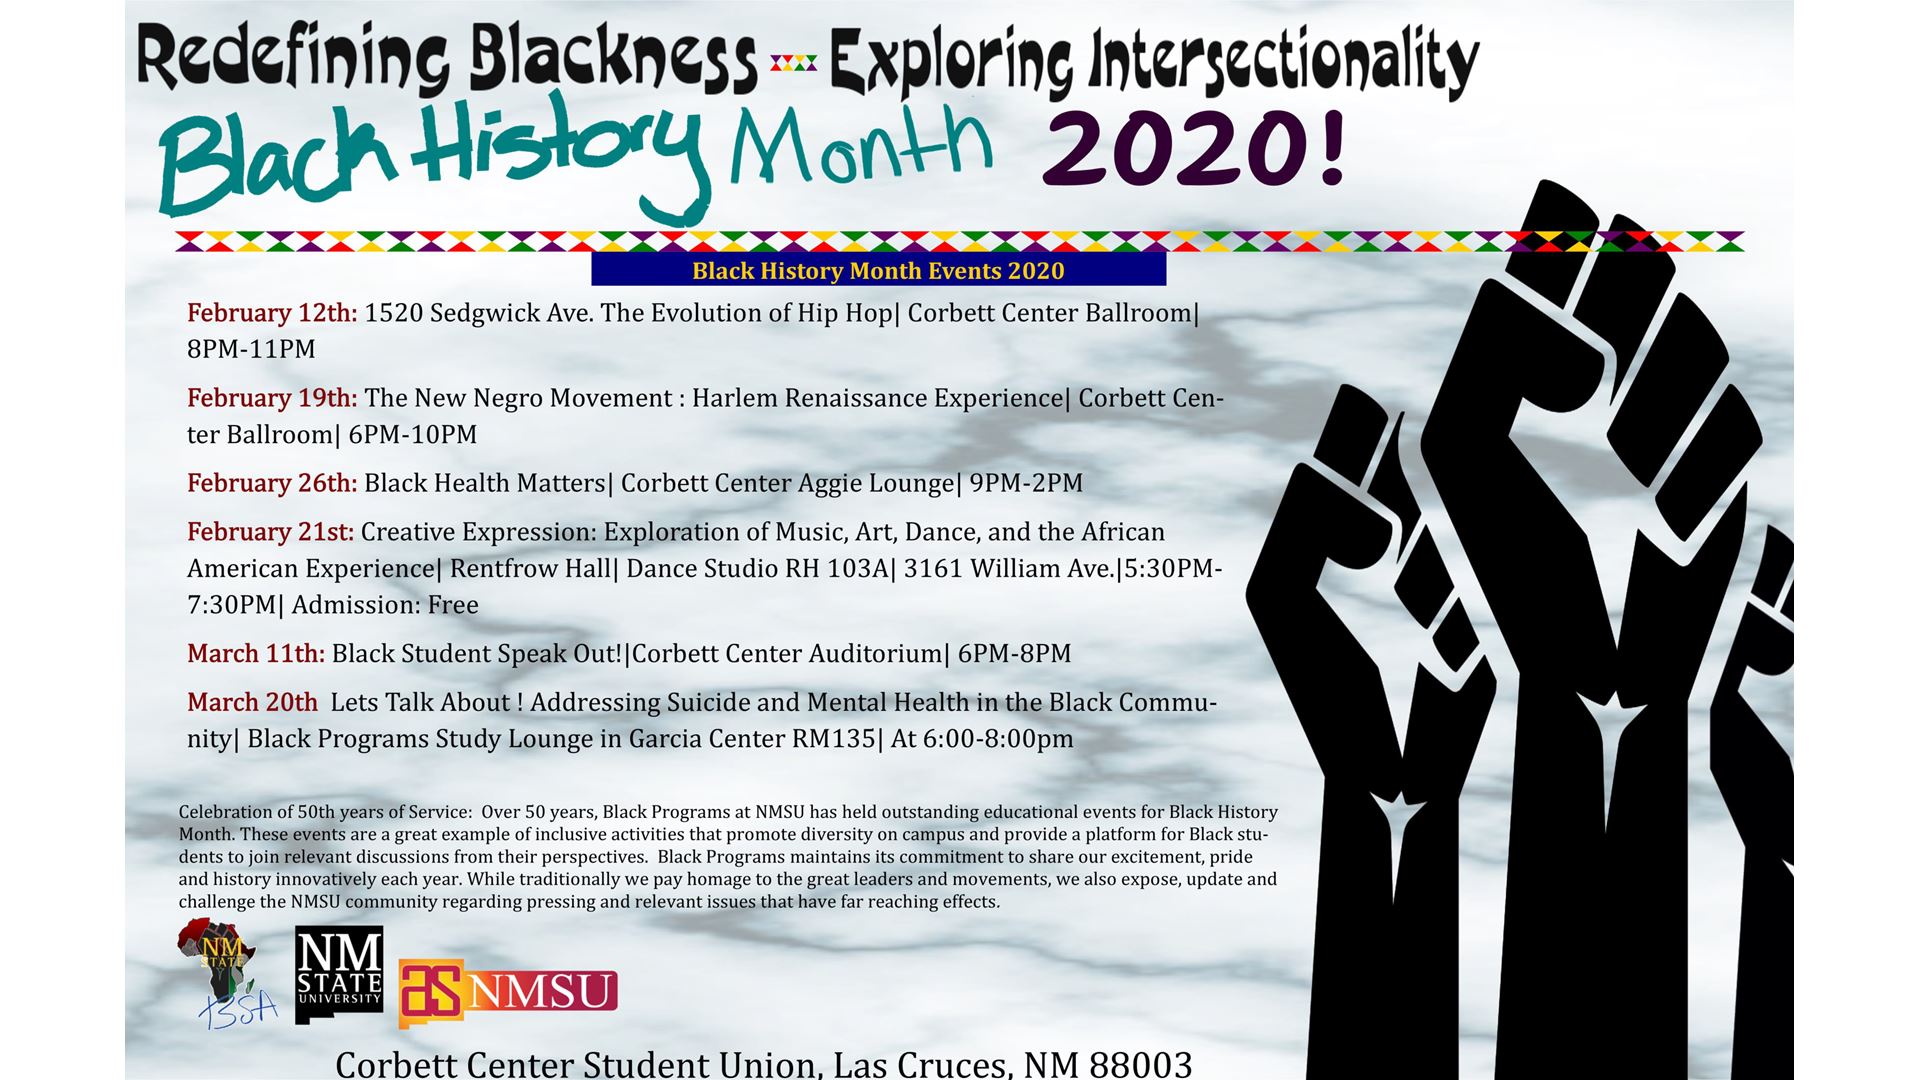 NMSU’s Black History Month to feature discussions on mental health, hip-hop, and more